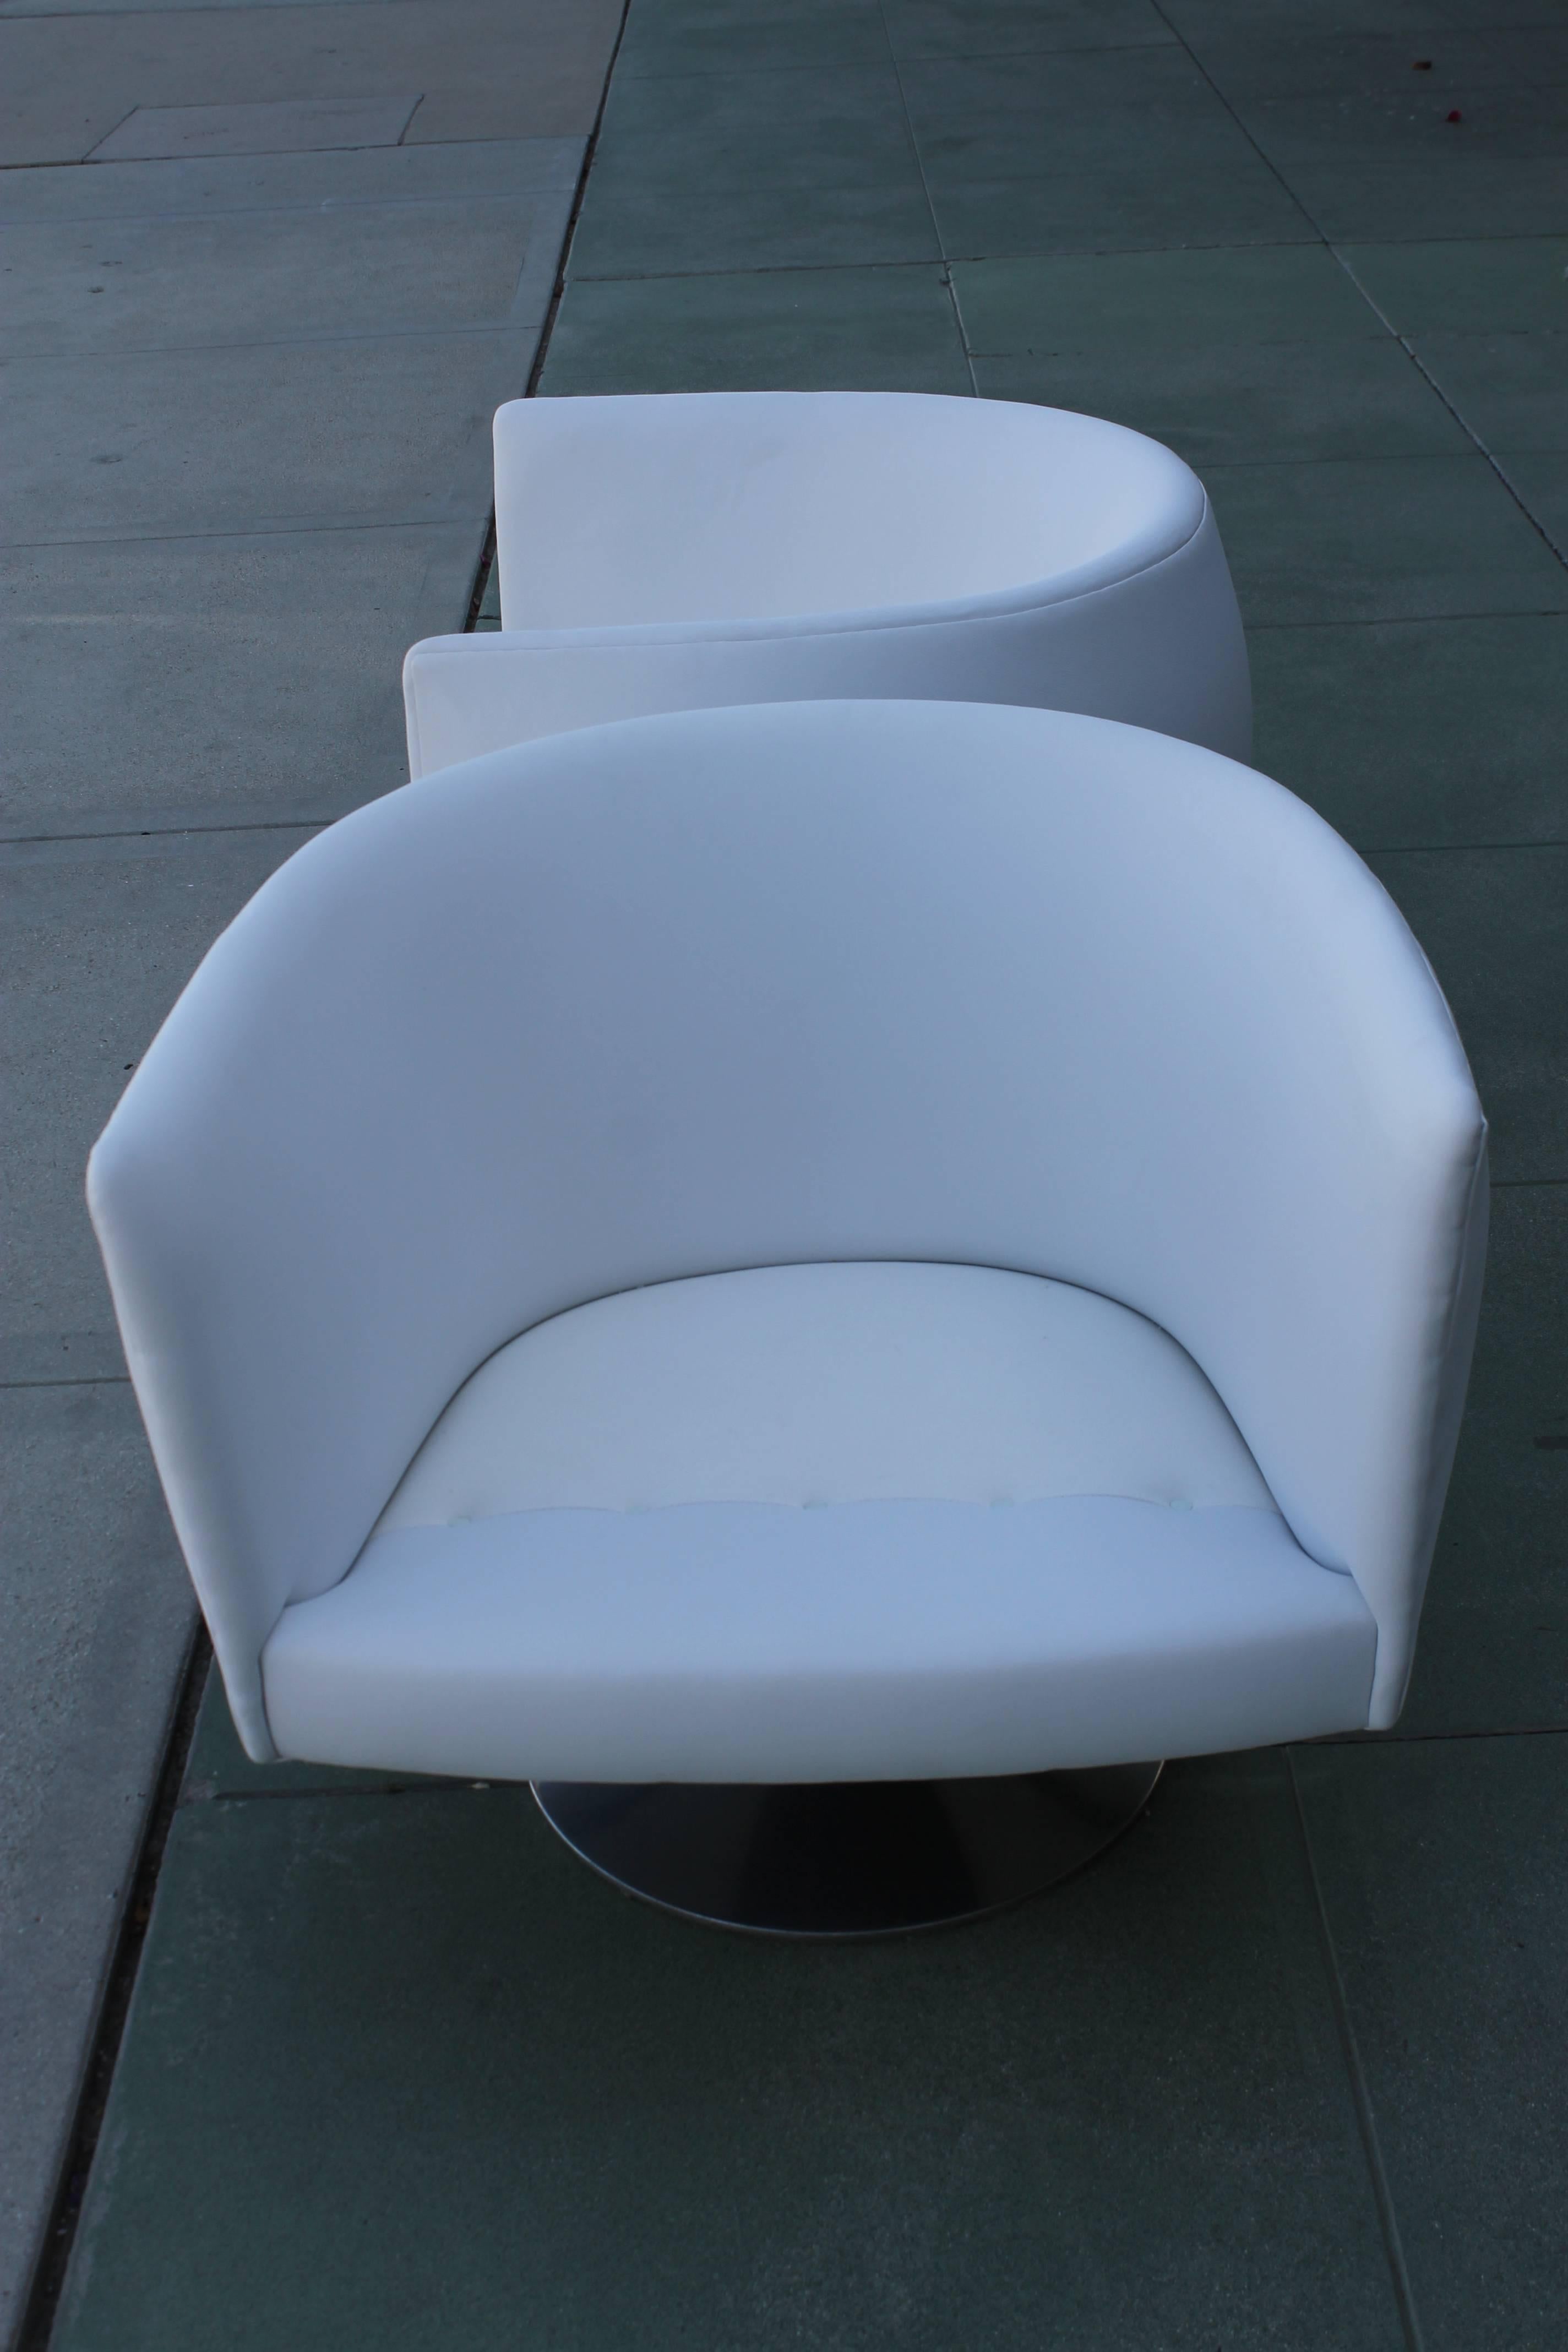 American Pair of Lounge Chairs, style of Milo Baughman